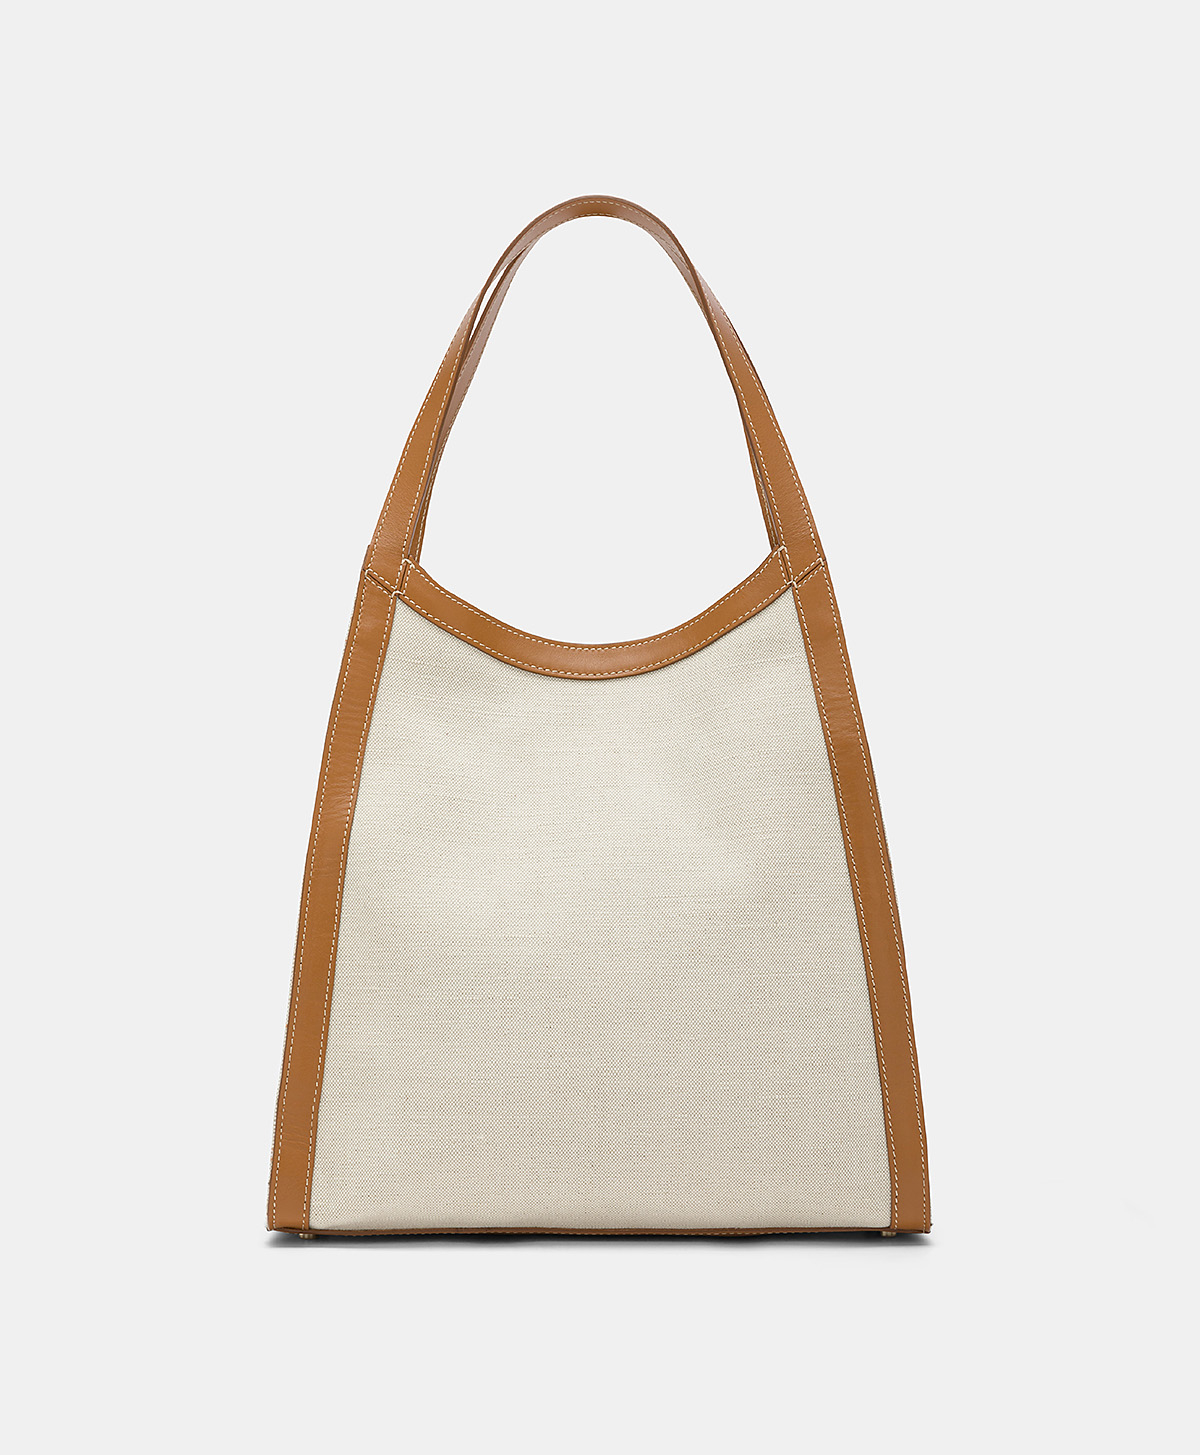 GERALDINE BAG IN LEATHER AND CANVAS - BEIGE - Momonì